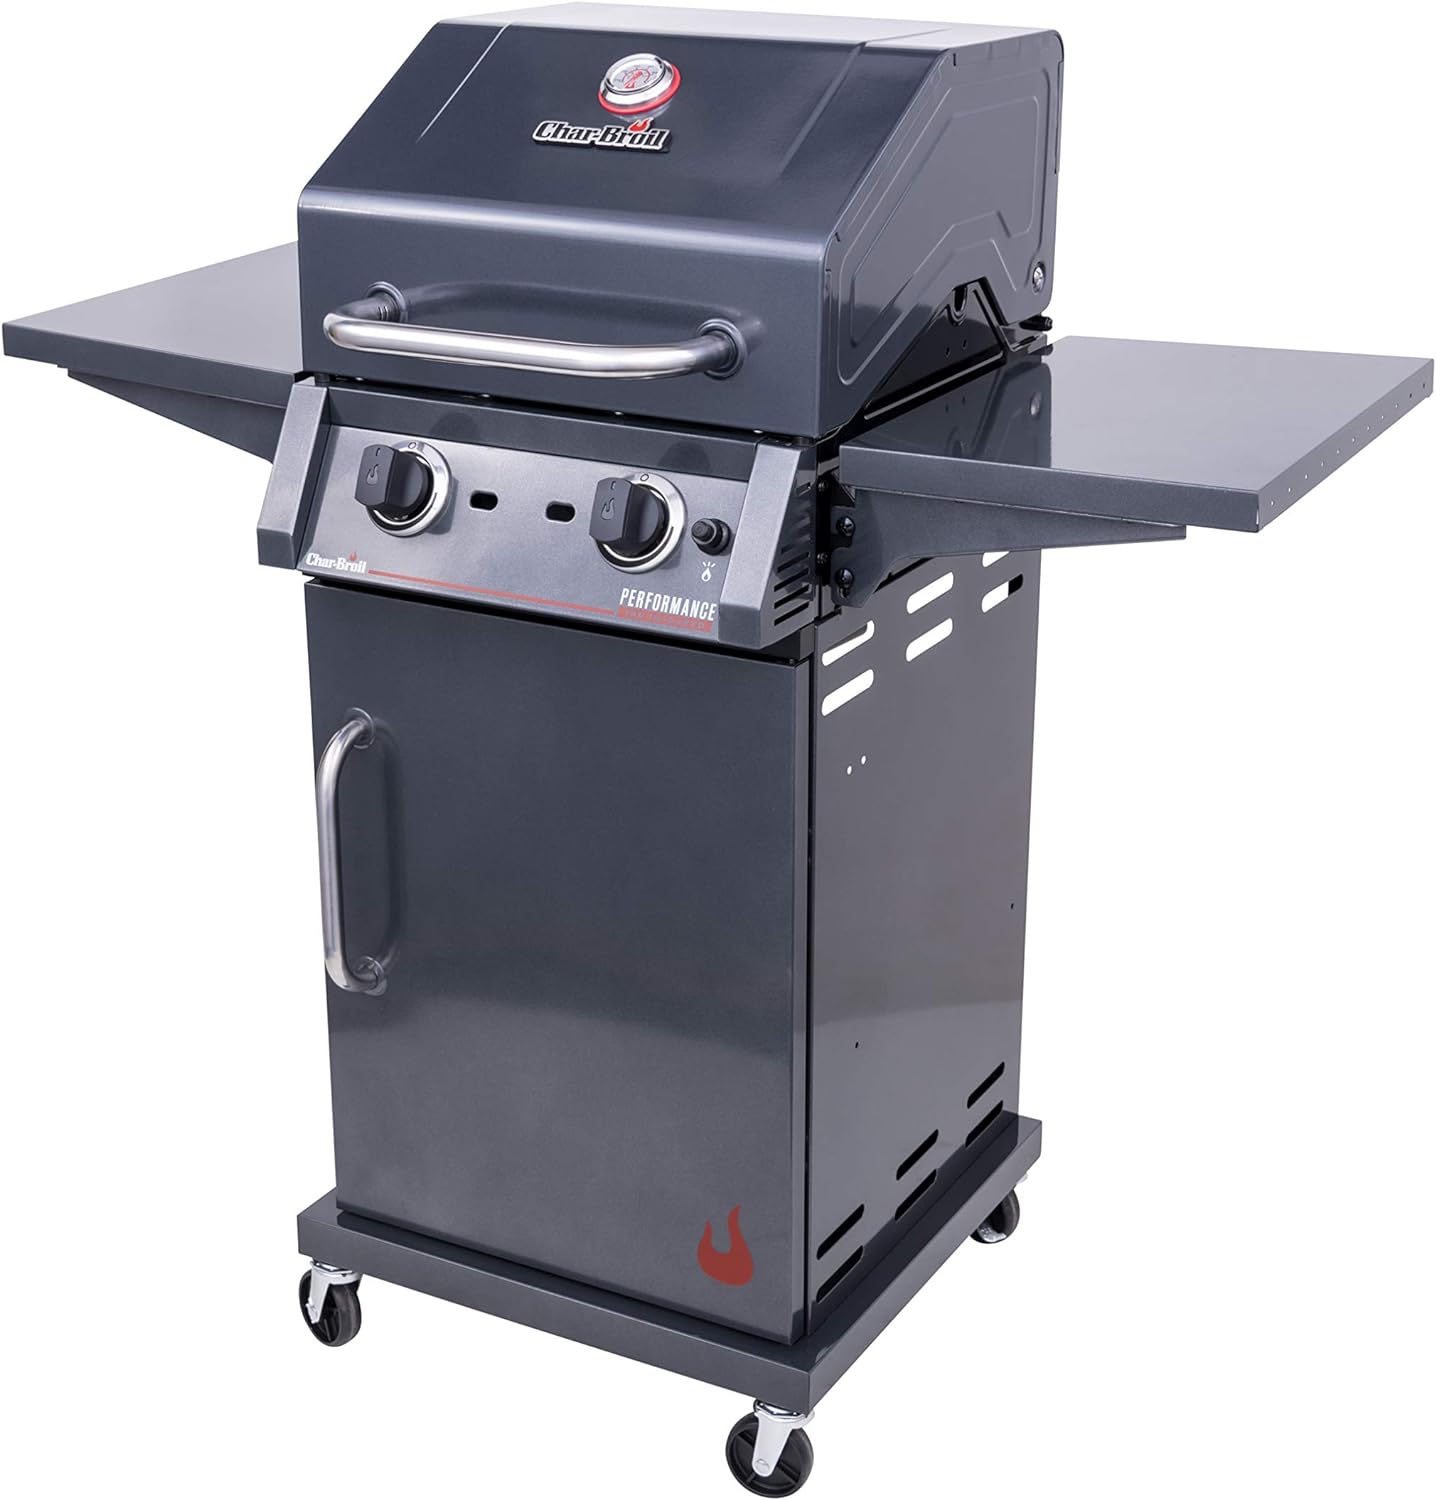 Char-Broil® Performance Series™ 2-Burner Grill Review